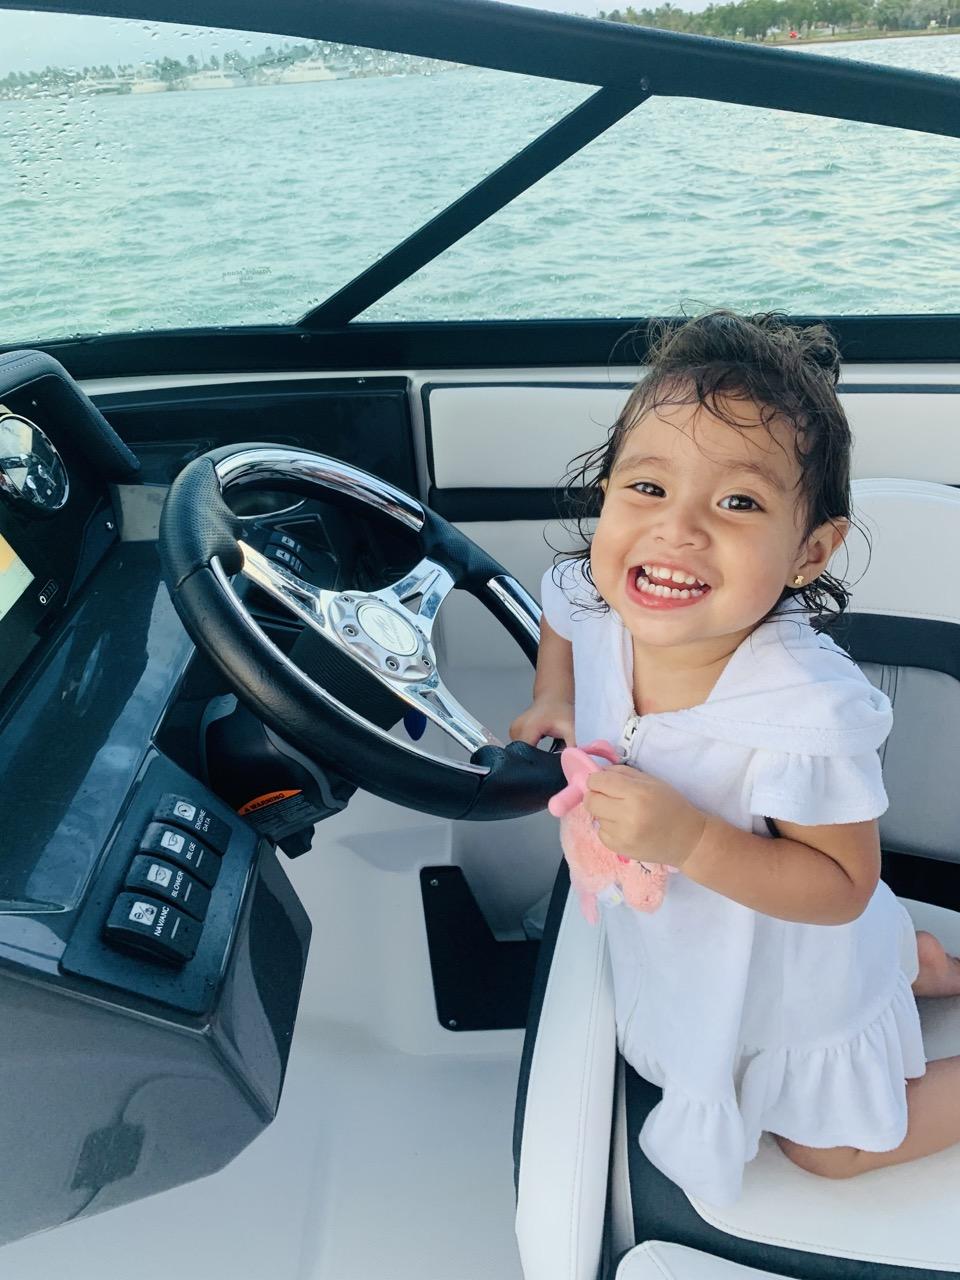 What is the best boat rental company in Miami?